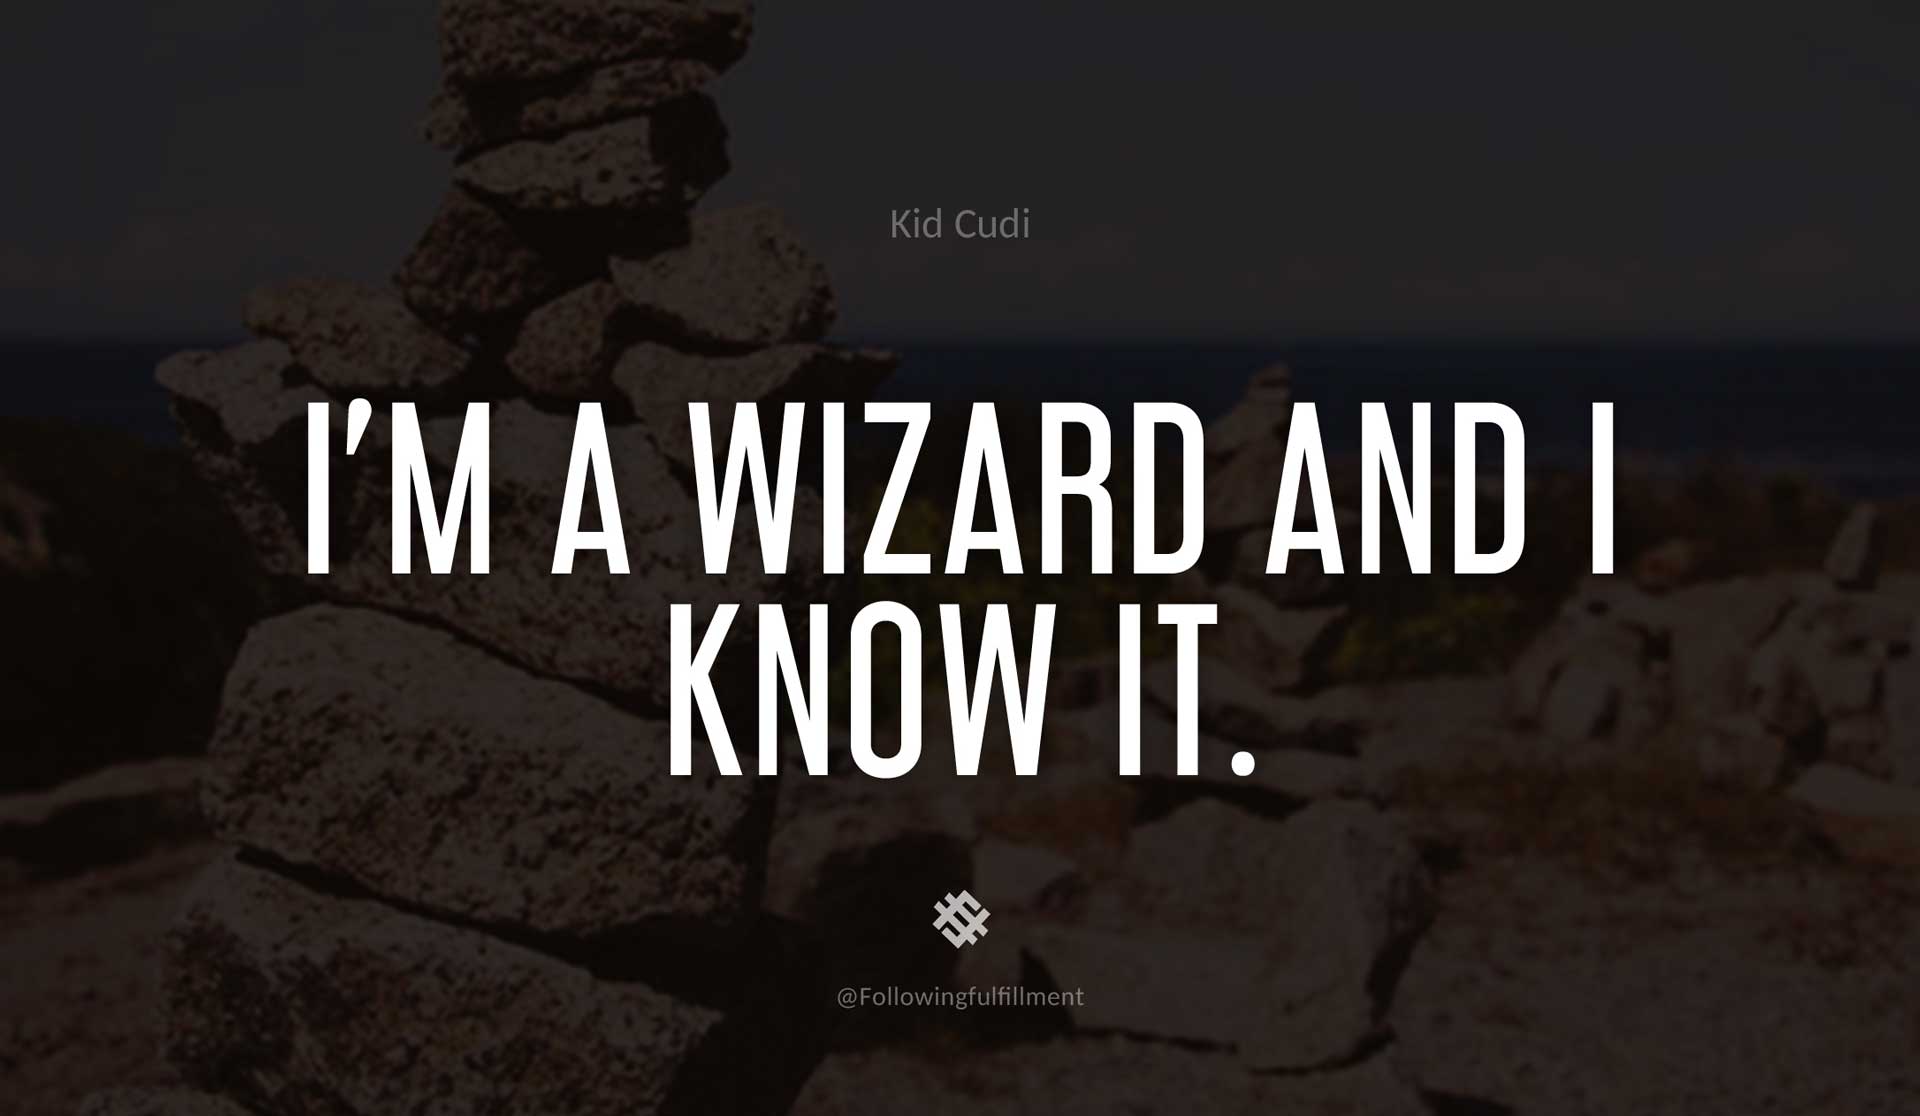 I'm-a-wizard-and-I-know-it.-KID-CUDI-Quote.jpg